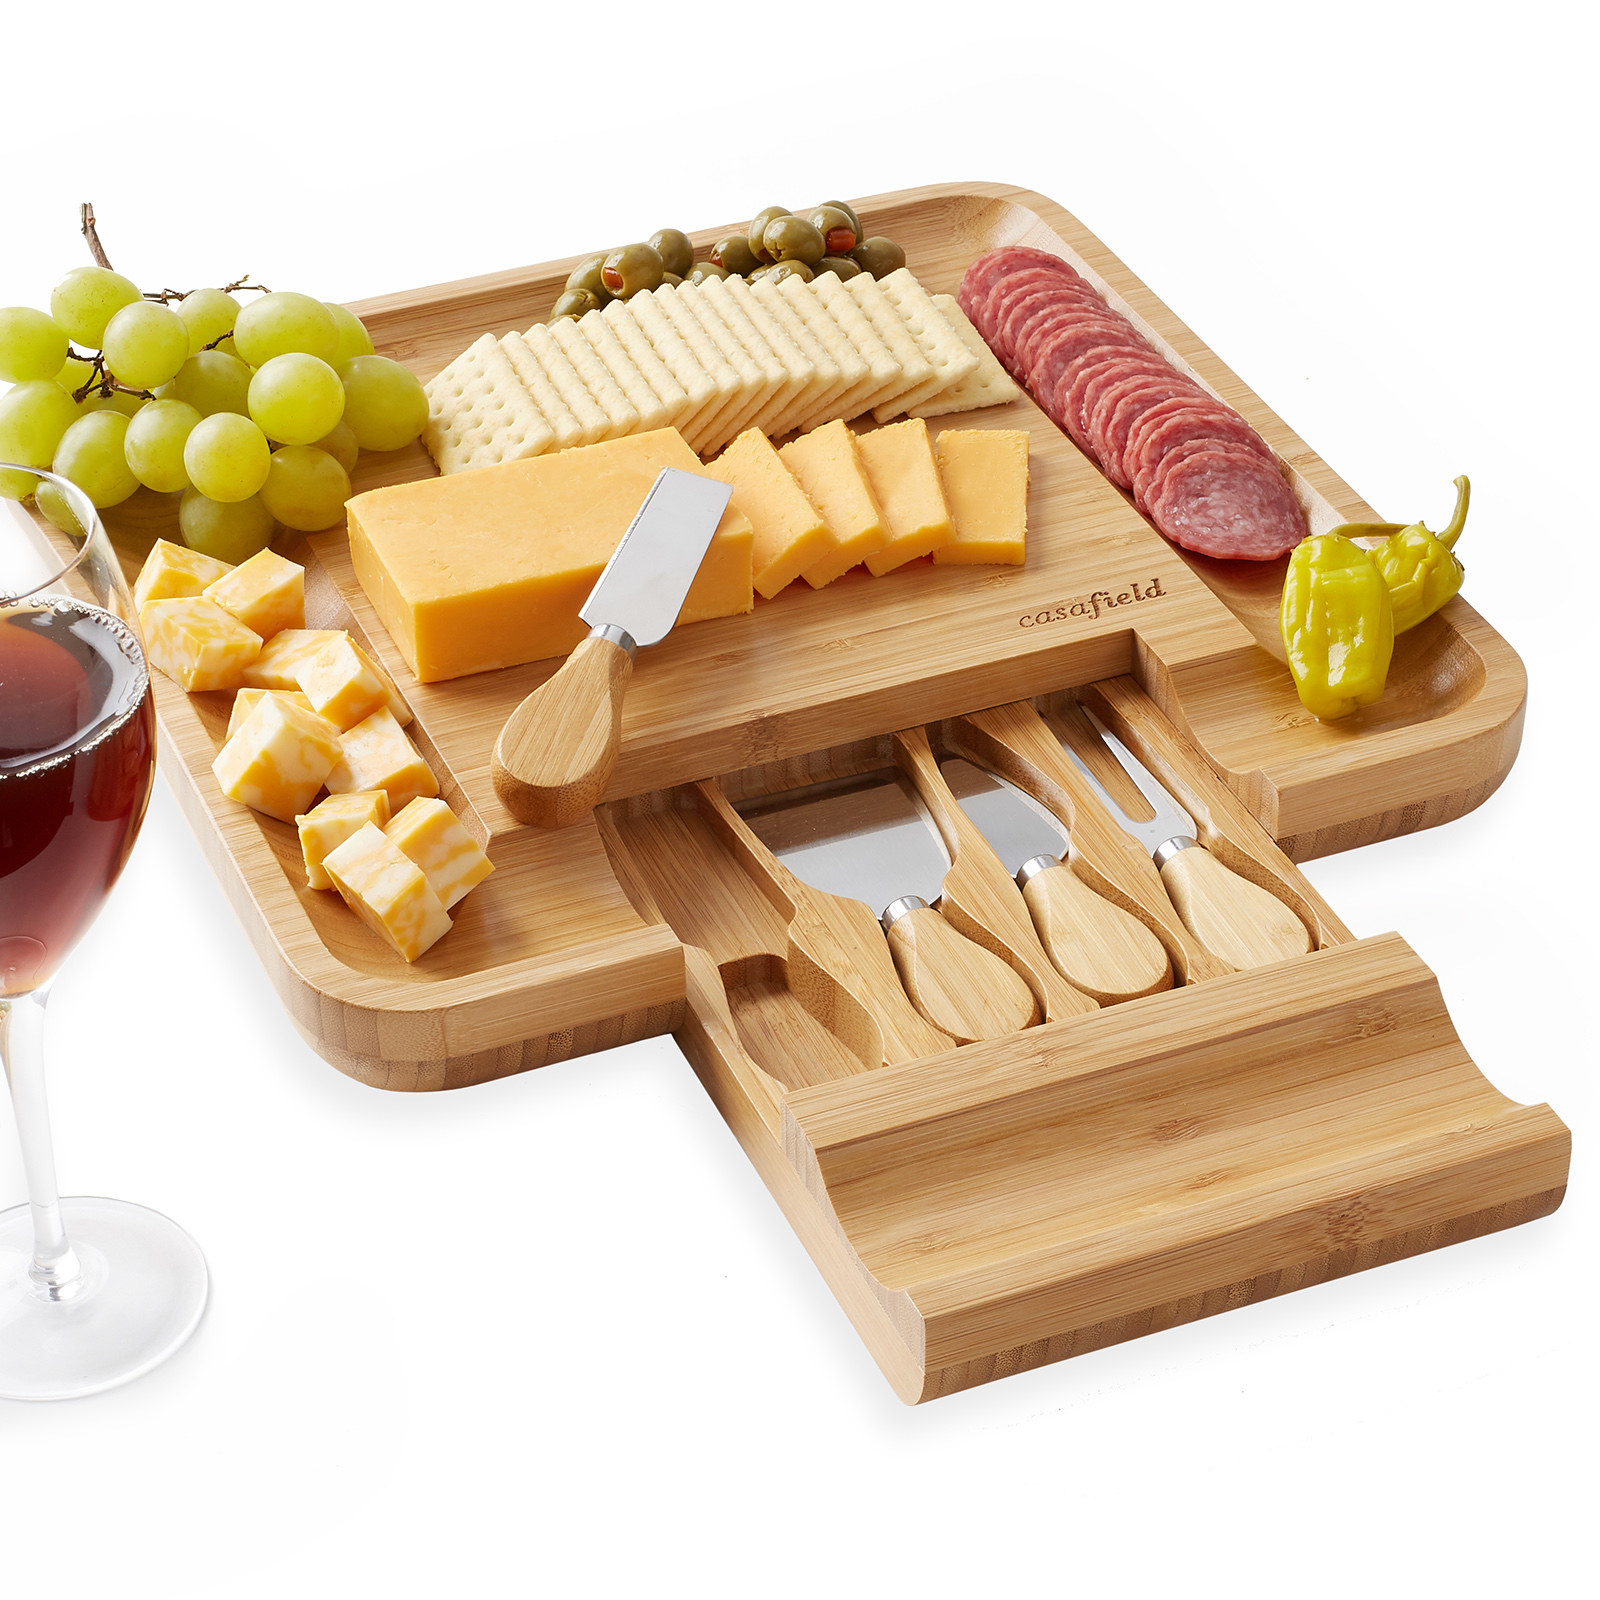 Bamboo tray and knife set shown with food and a wine glass next to it.